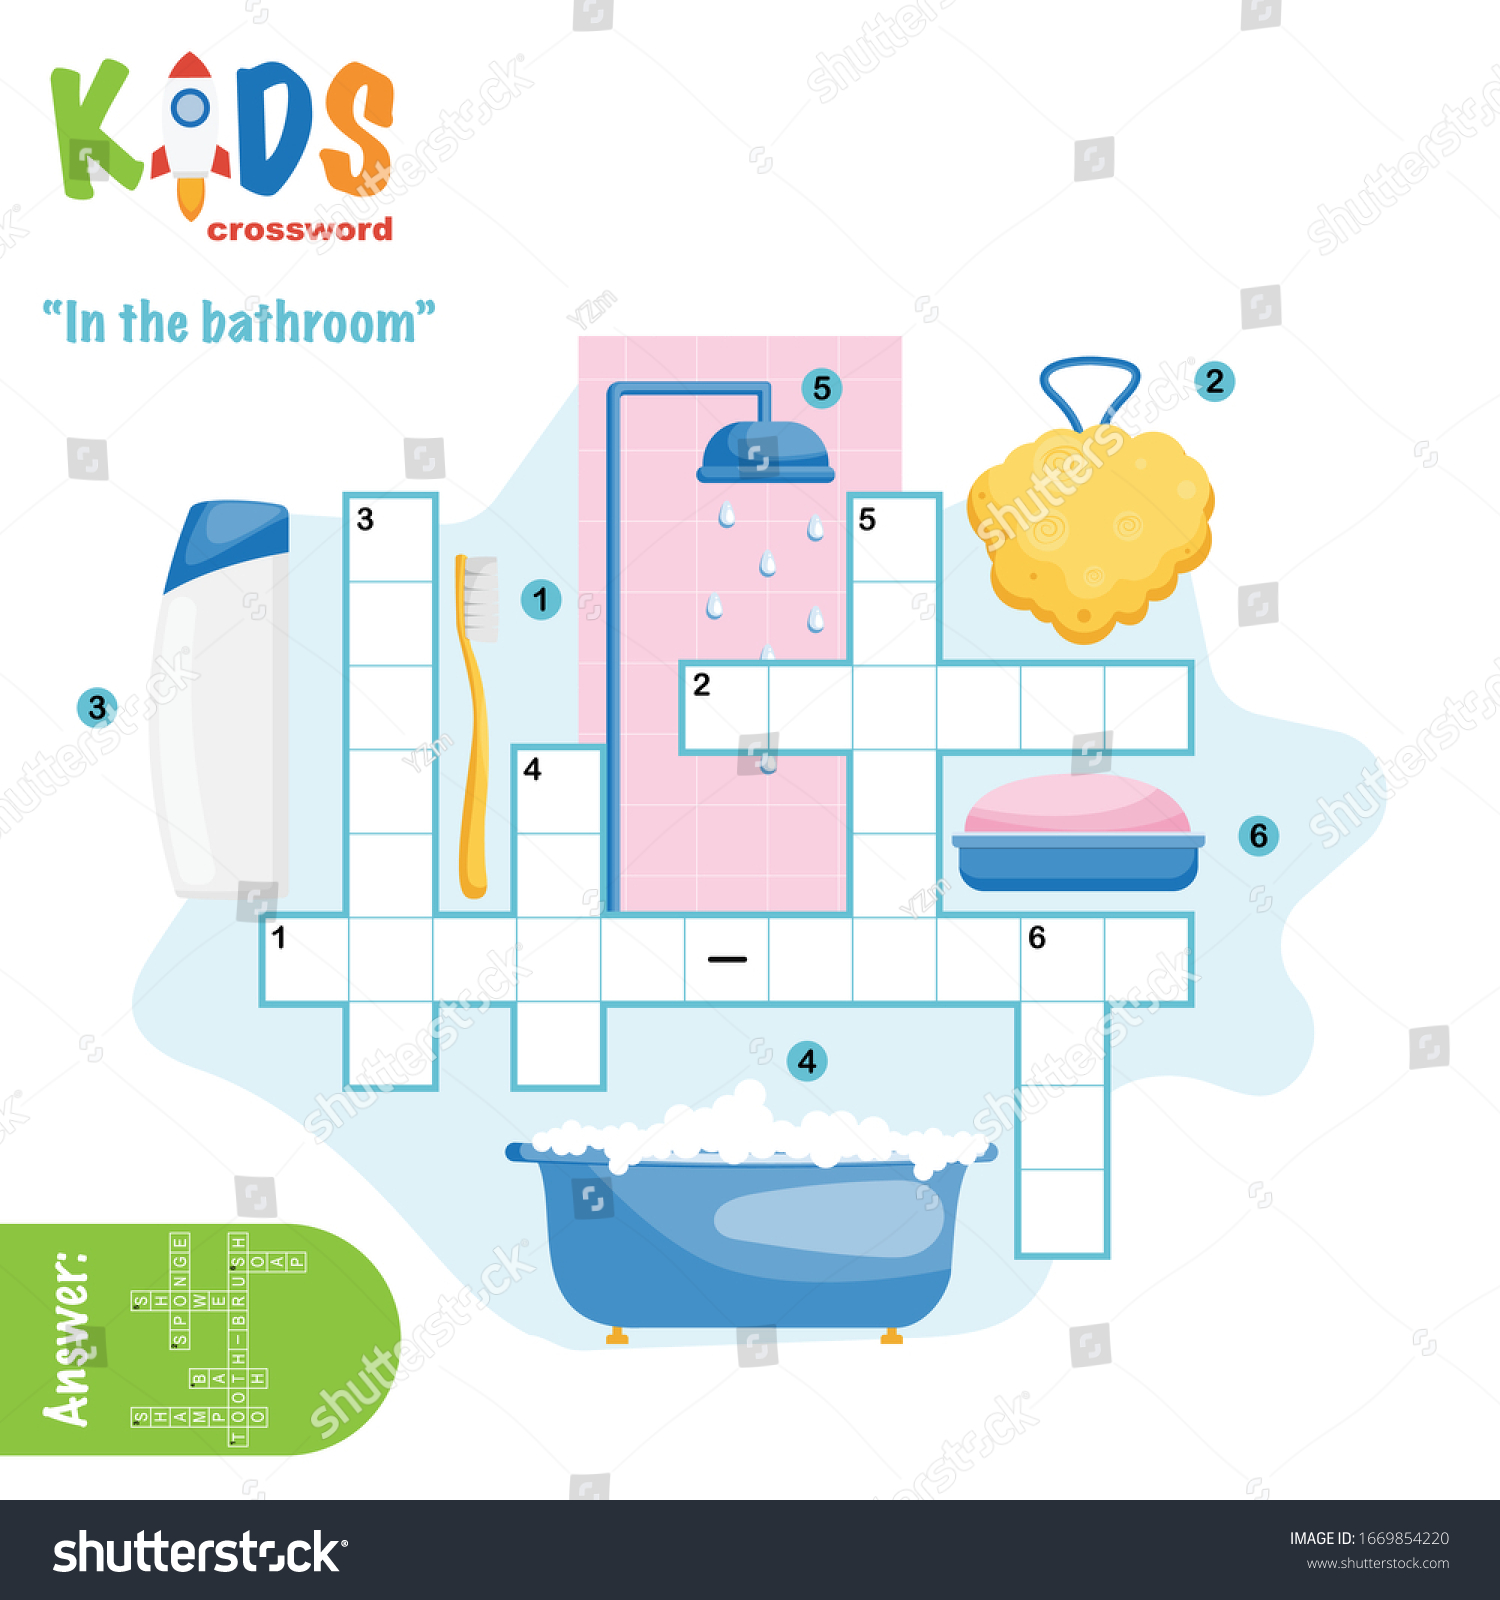 SVG of Easy crossword puzzle 'In the bathroom', for children in elementary and middle school. Fun way to practice language comprehension and expand vocabulary. Includes answers. svg